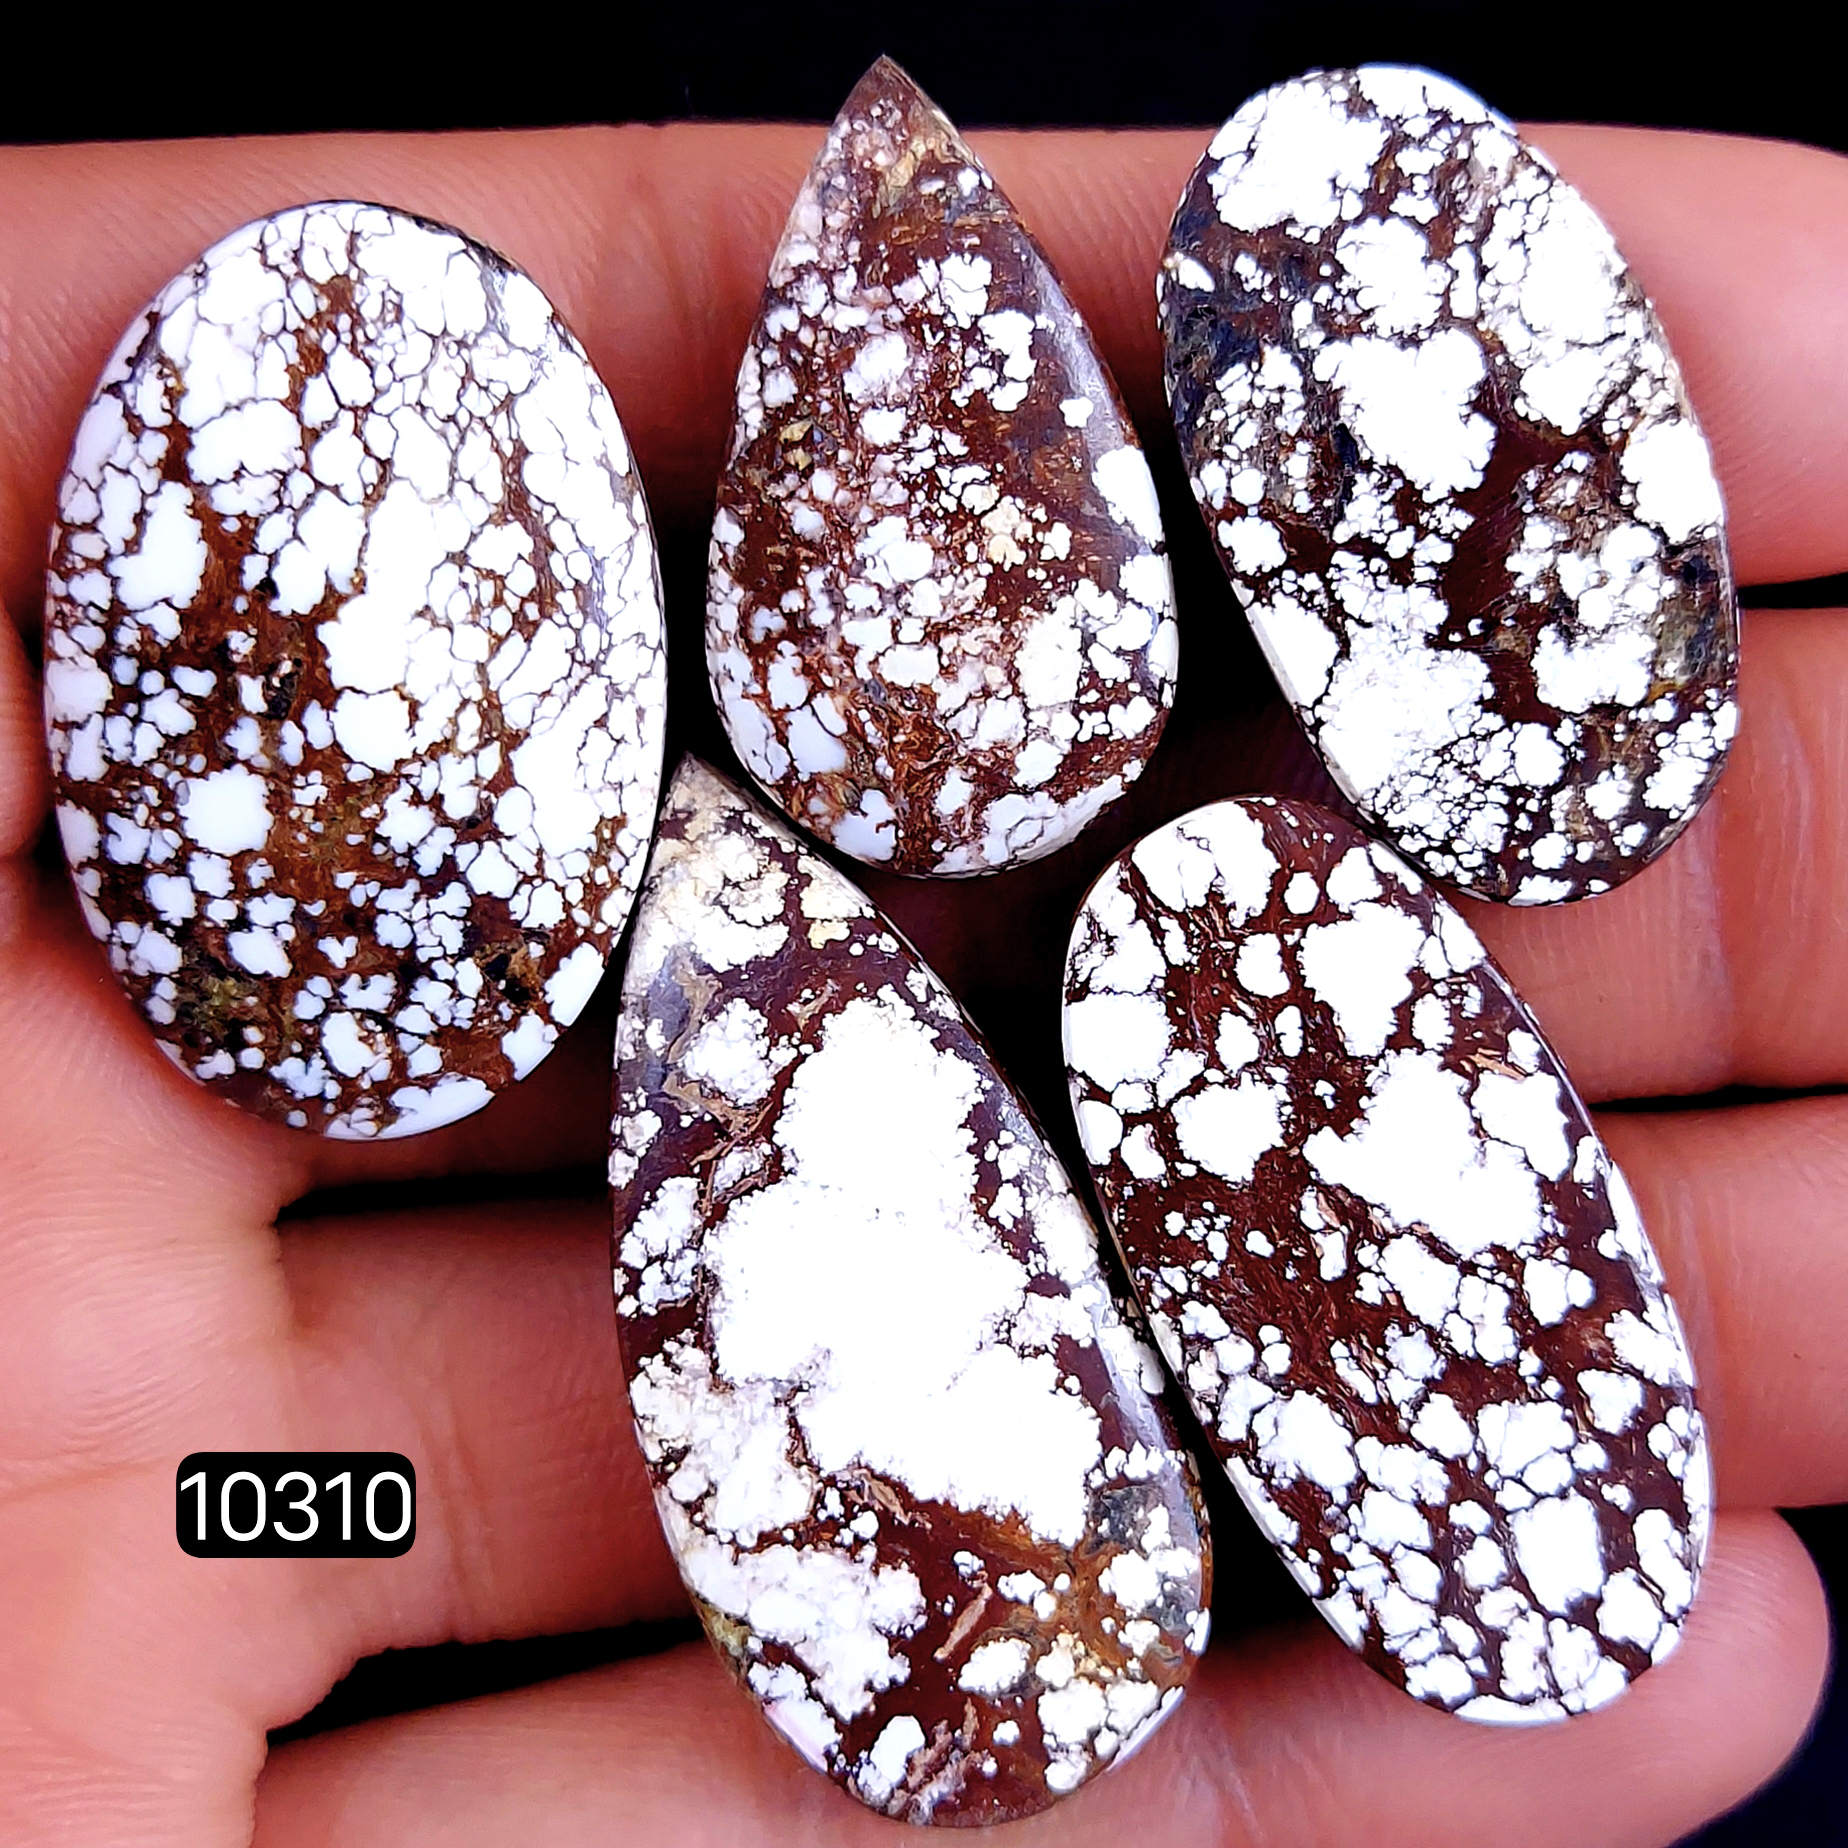 5Pc  164Cts Natural Wild Horse Magnesite Turquoise Cabochon Polished Loose Gemstone Flat Back Multi Jewelry Making Crystal  39x18 30x16mm #10310